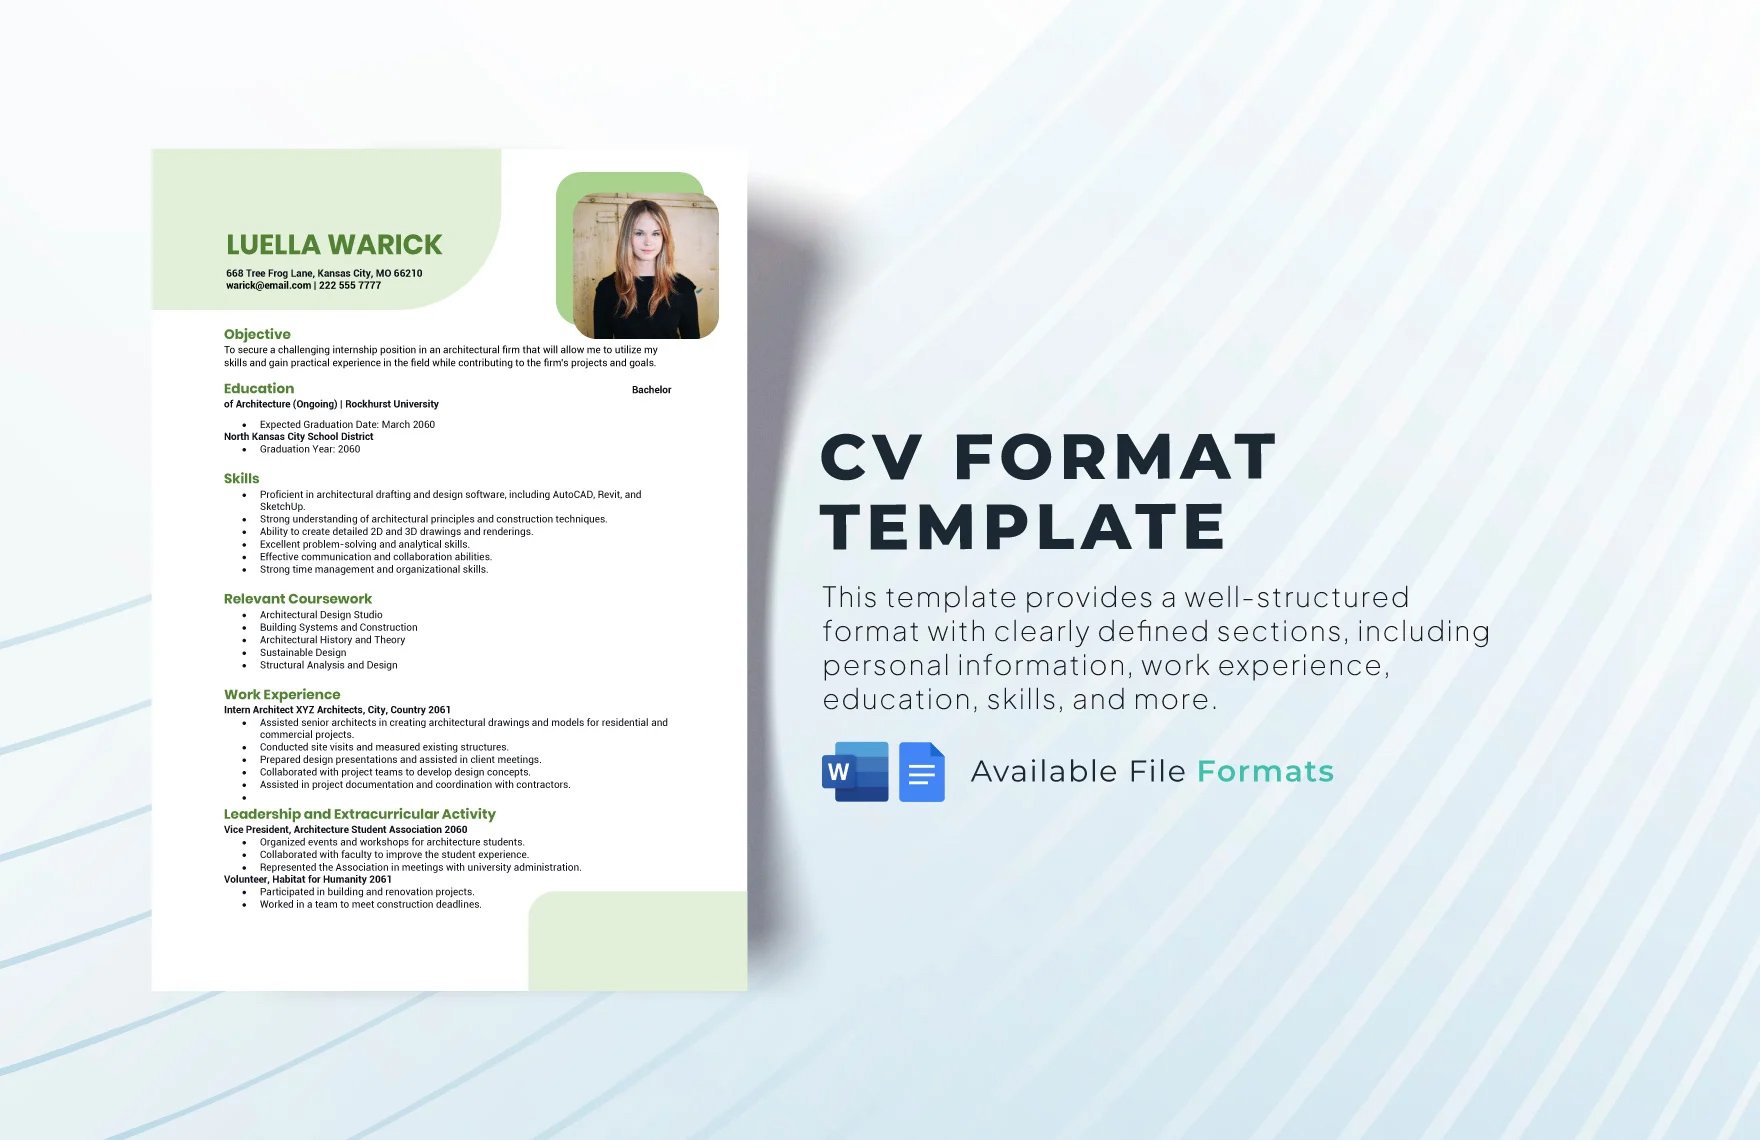 Free CV Format Template in Word, Google Docs, Apple Pages